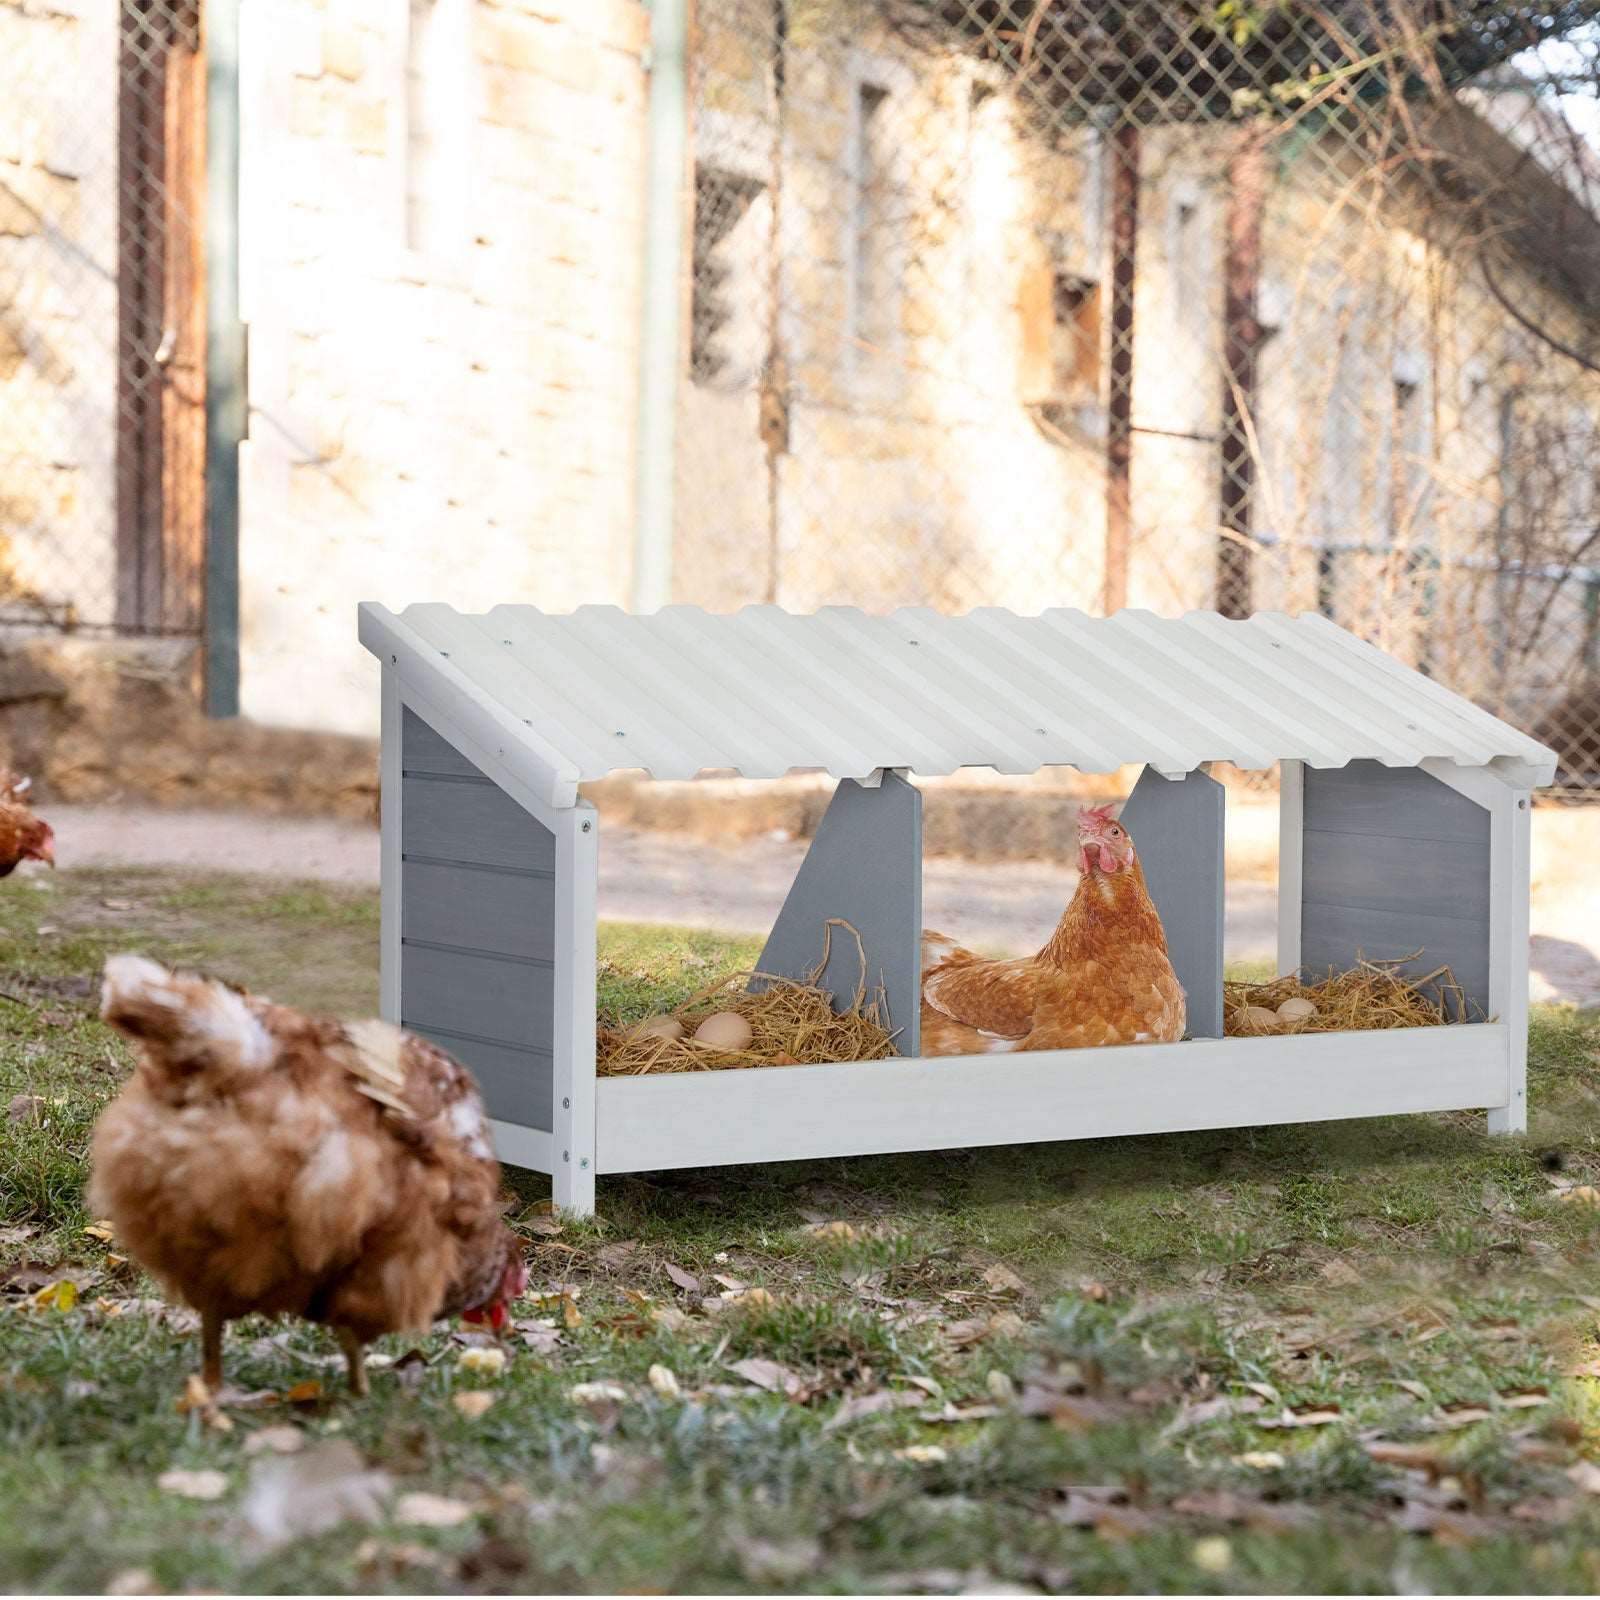 petsfit-triple-chicken-nesting-box-chicken-coop-accessories-with-pvc-roofing-versatile-use-wood-nesting-boxes-for-hens-easy-to-assemble-05